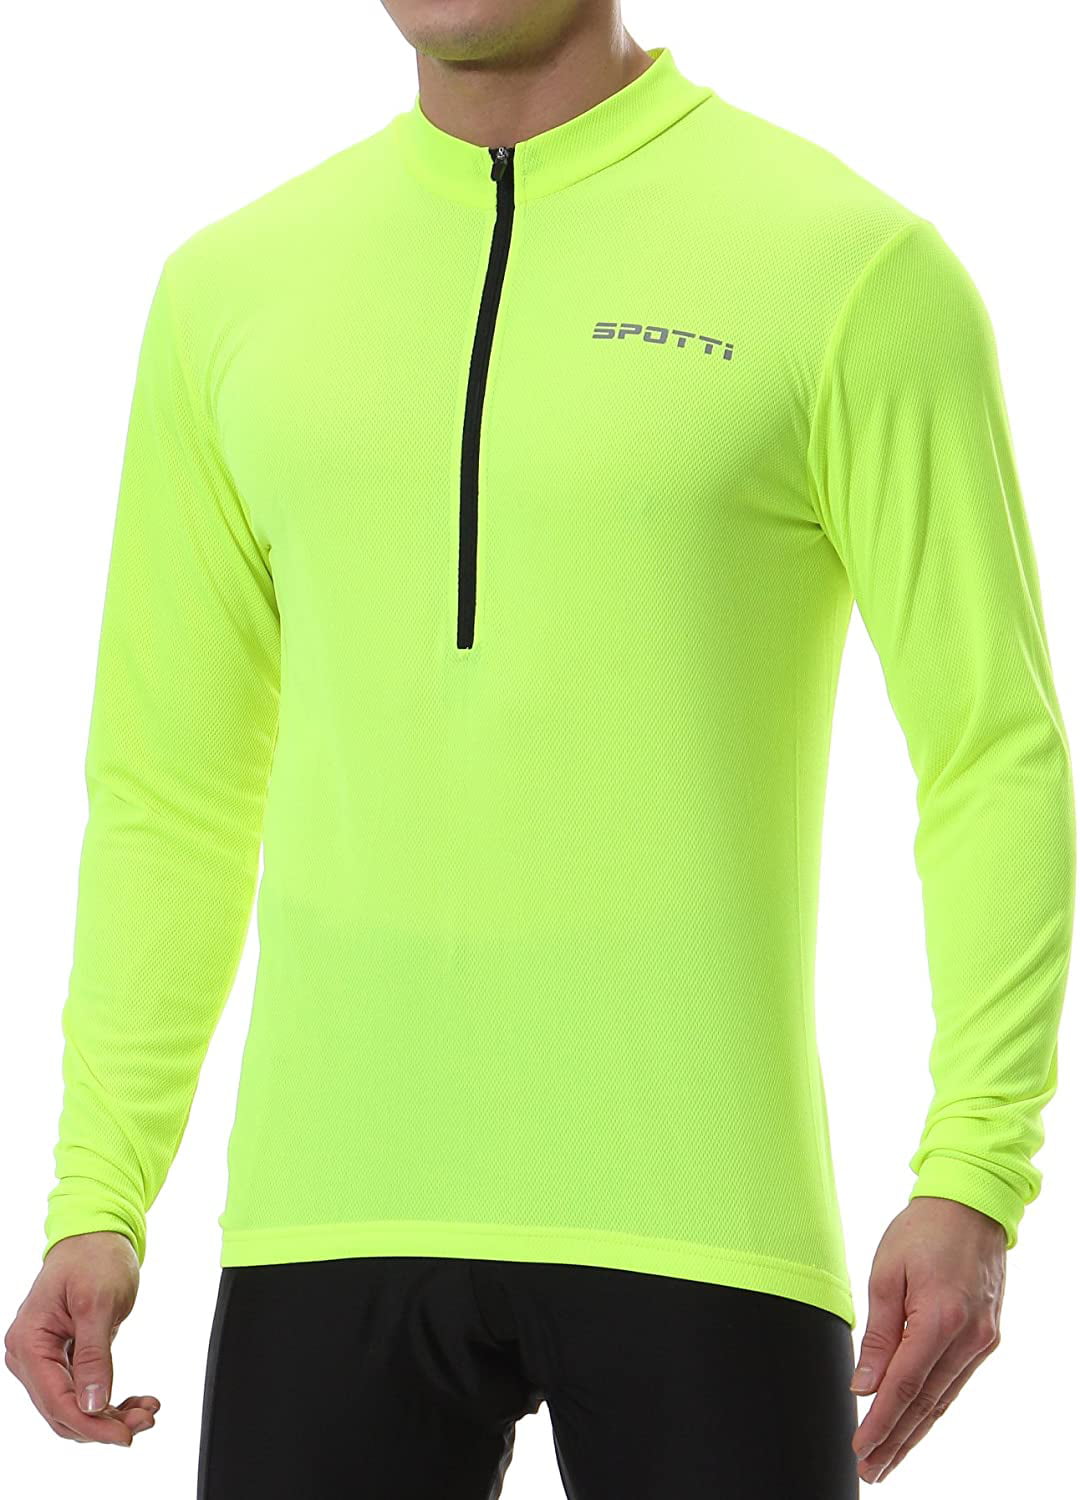 Quick Dry Biking Shirt Moisture Wicking Spotti Men's Cycling Bike Jersey Long Sleeve with 3 Rear Pockets Breathable 